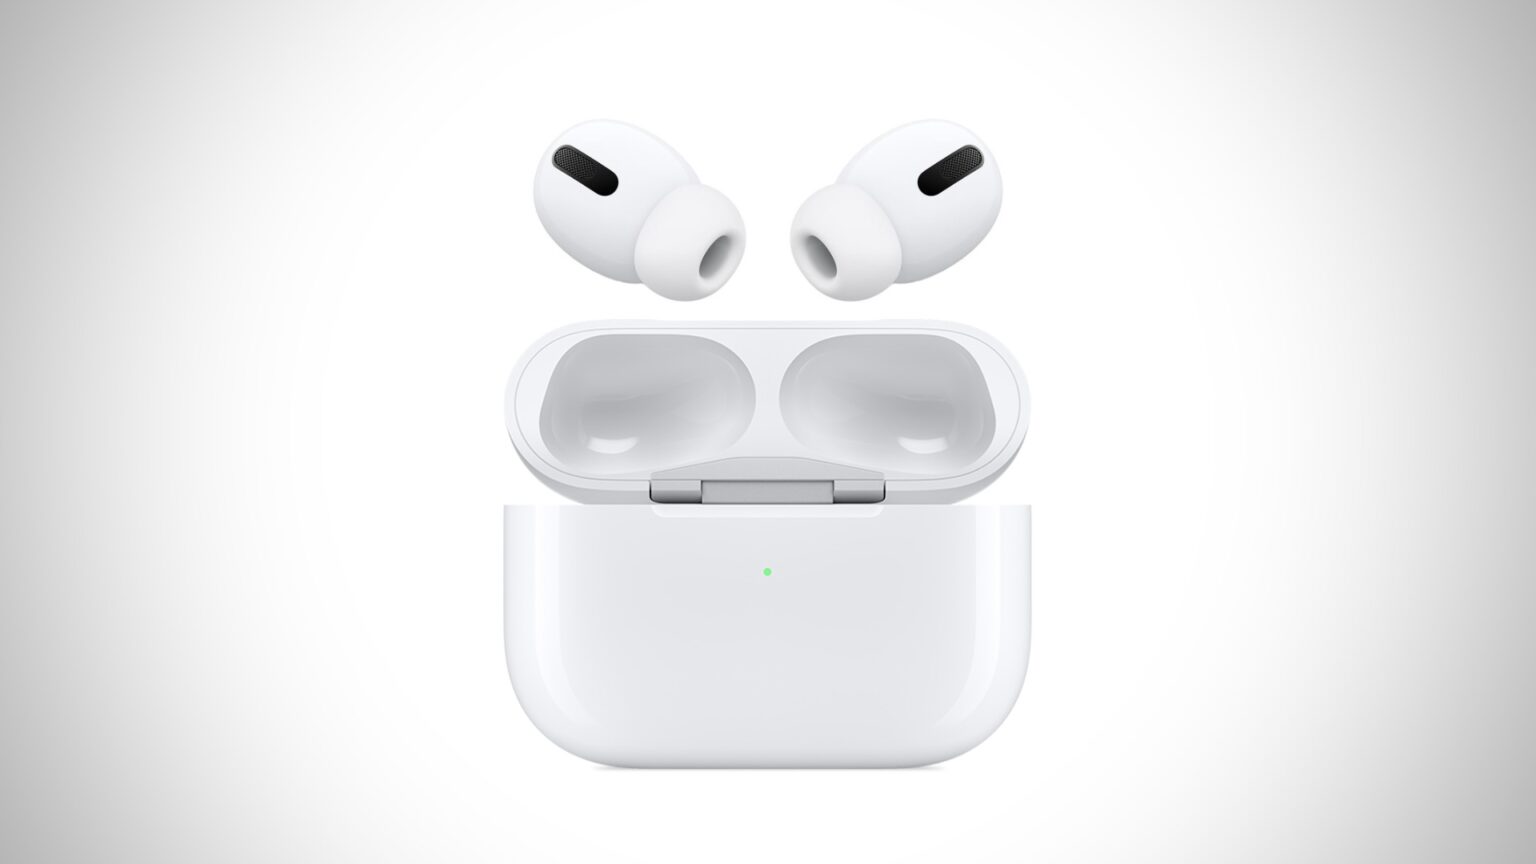 Don’t anticipate well being monitoring on this yr’s AirPods Professional